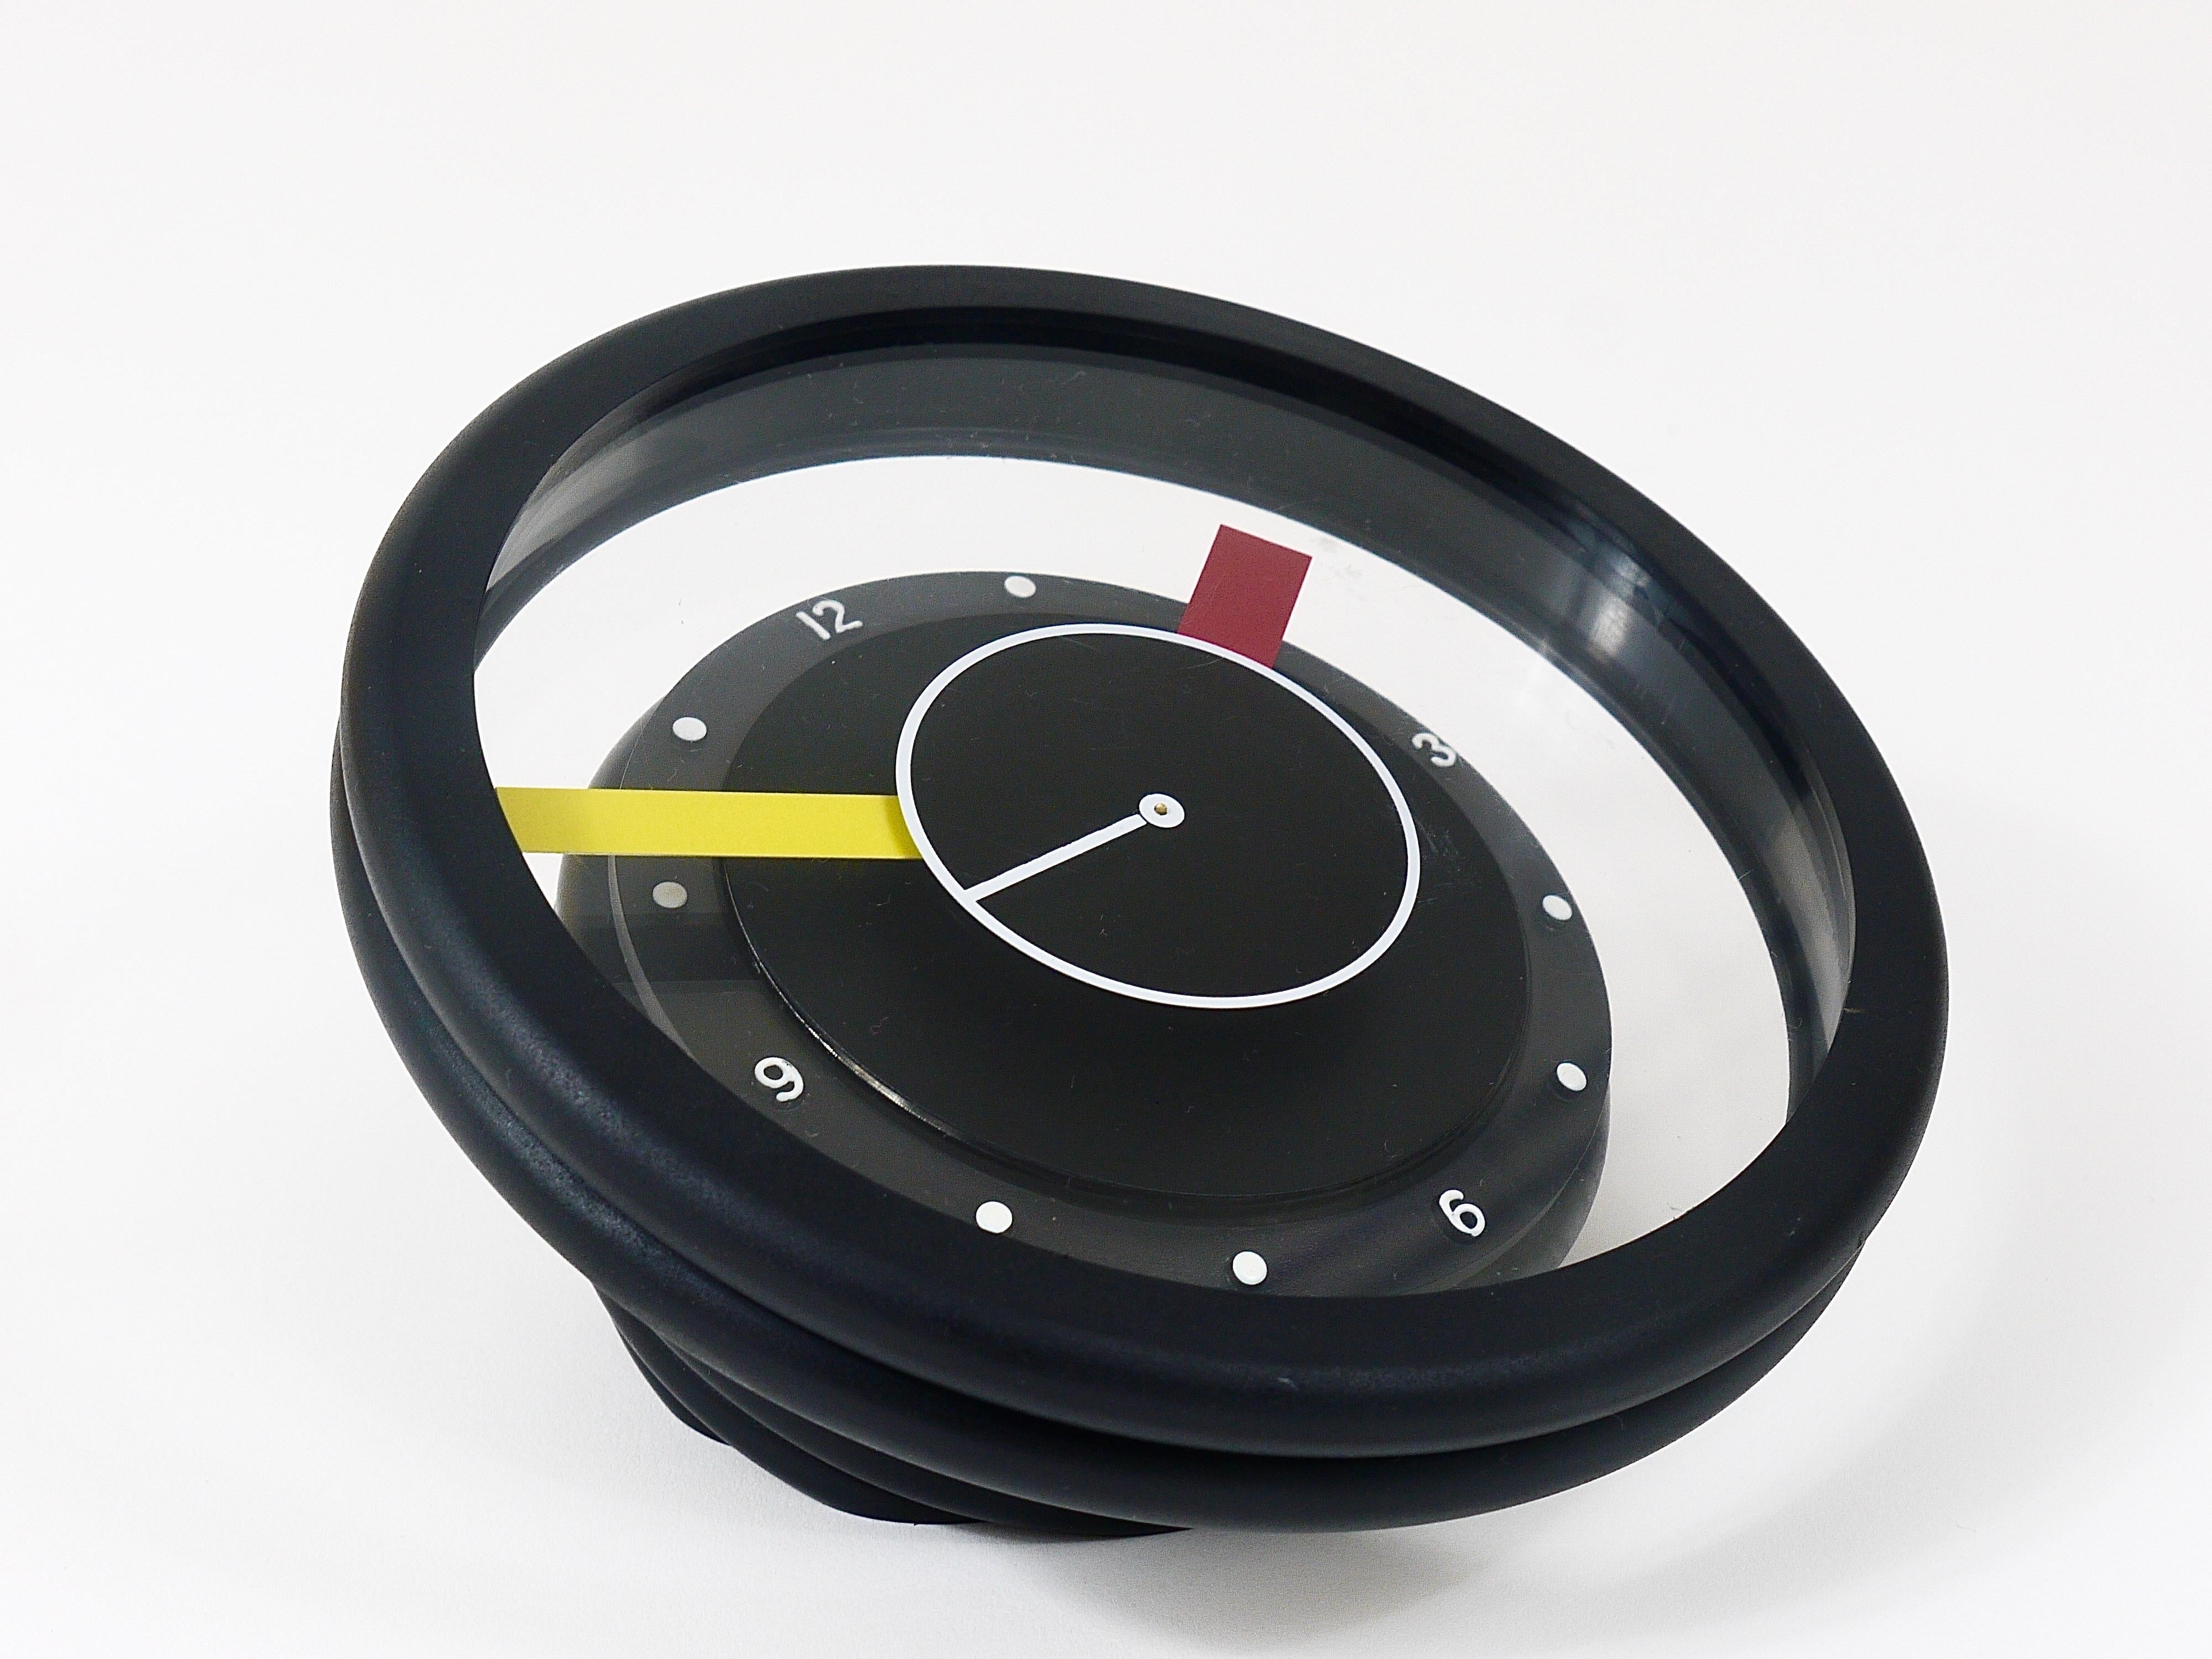 Postmodern Round Pop Art Desk or Table Clock, Memphis Milano Style, Italy, 1990s For Sale 4